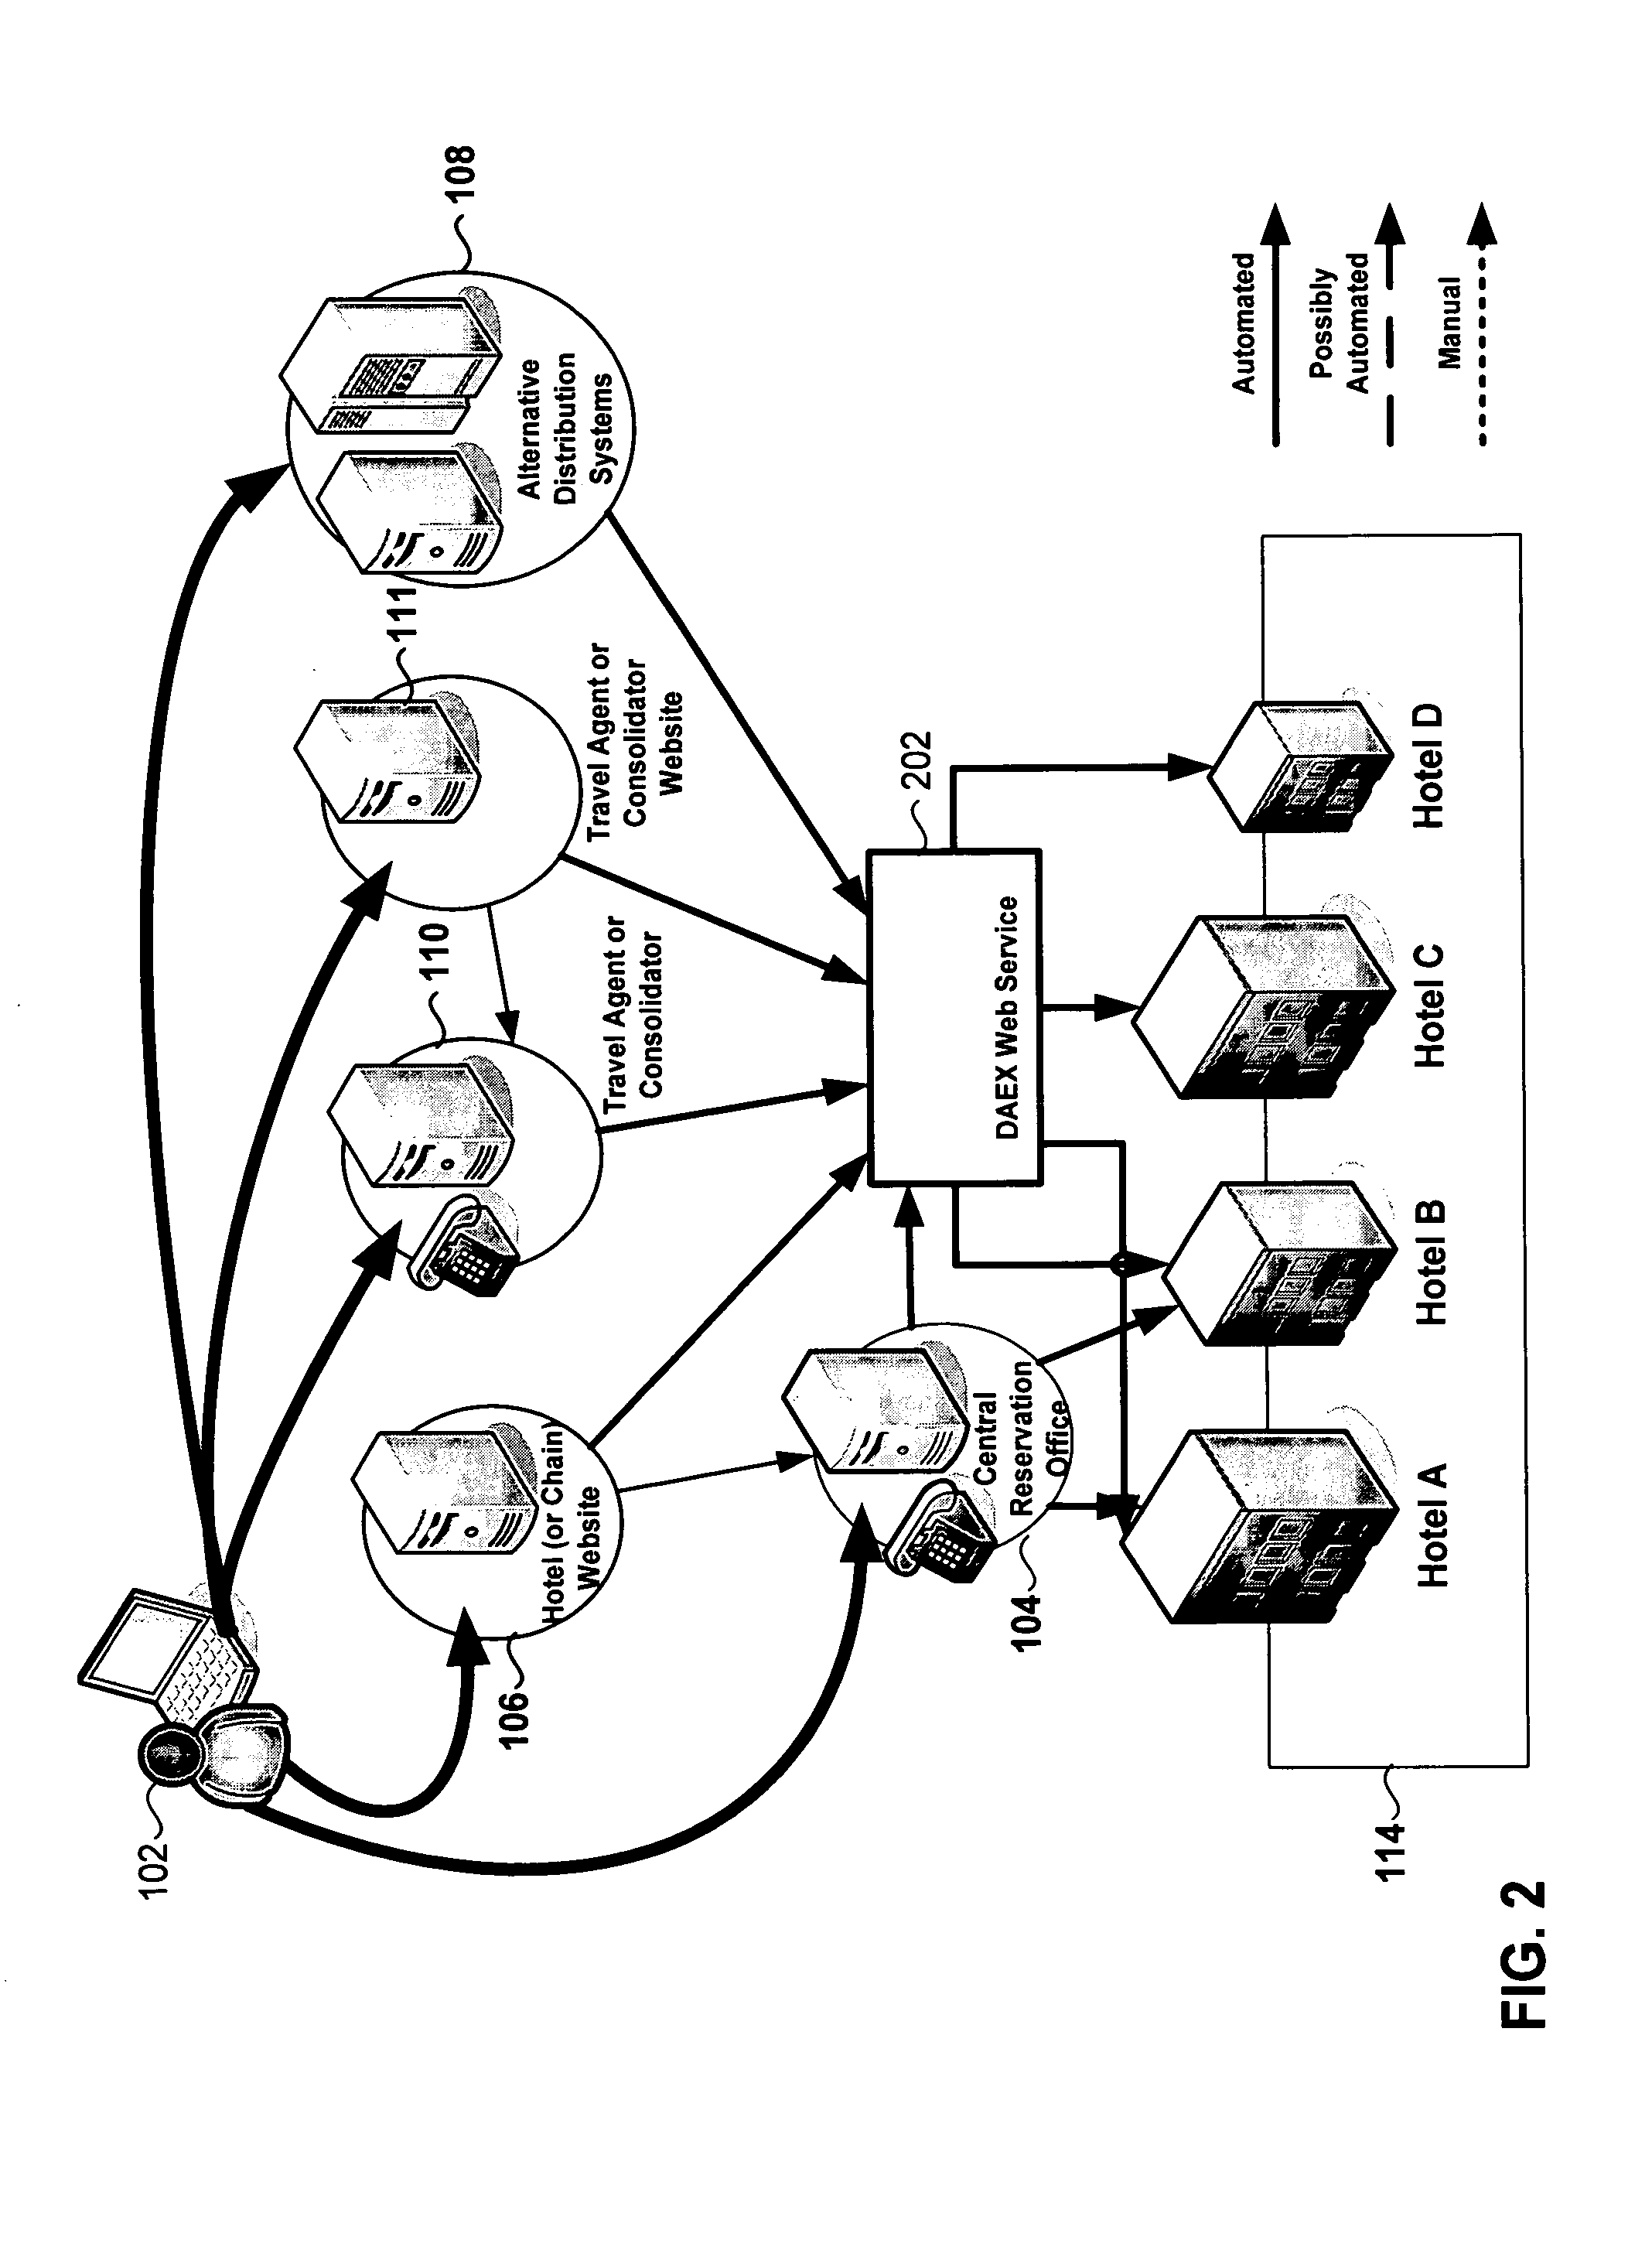 System and method for booking of hotel accommodations for travelers